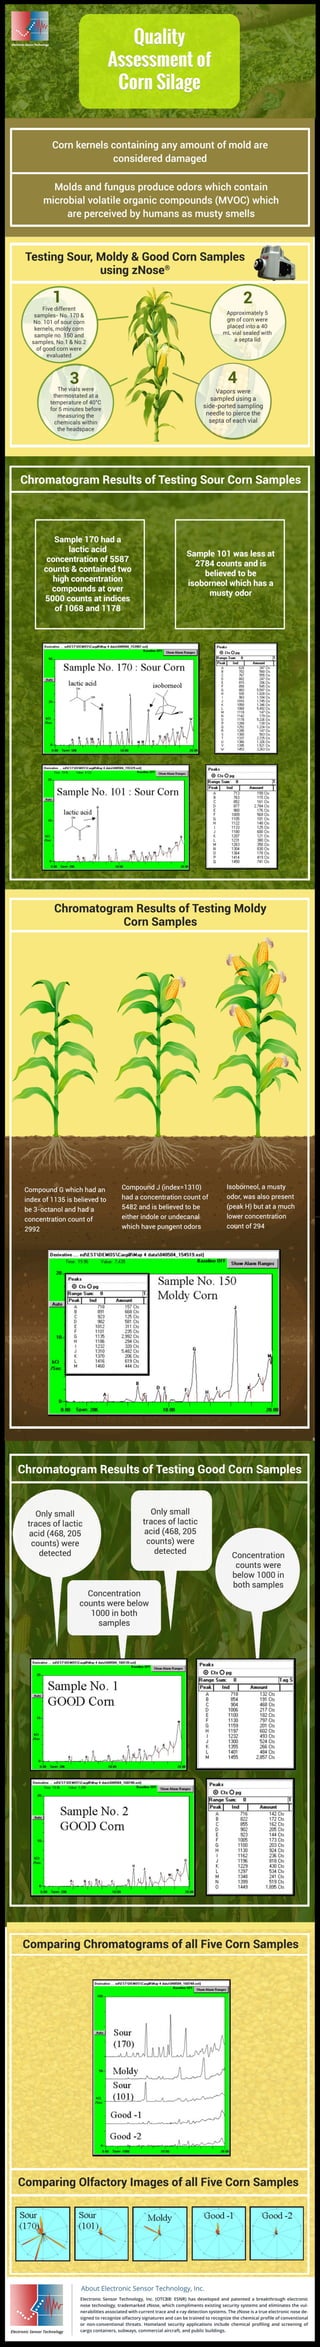 Quality Assessment of Corn Silage